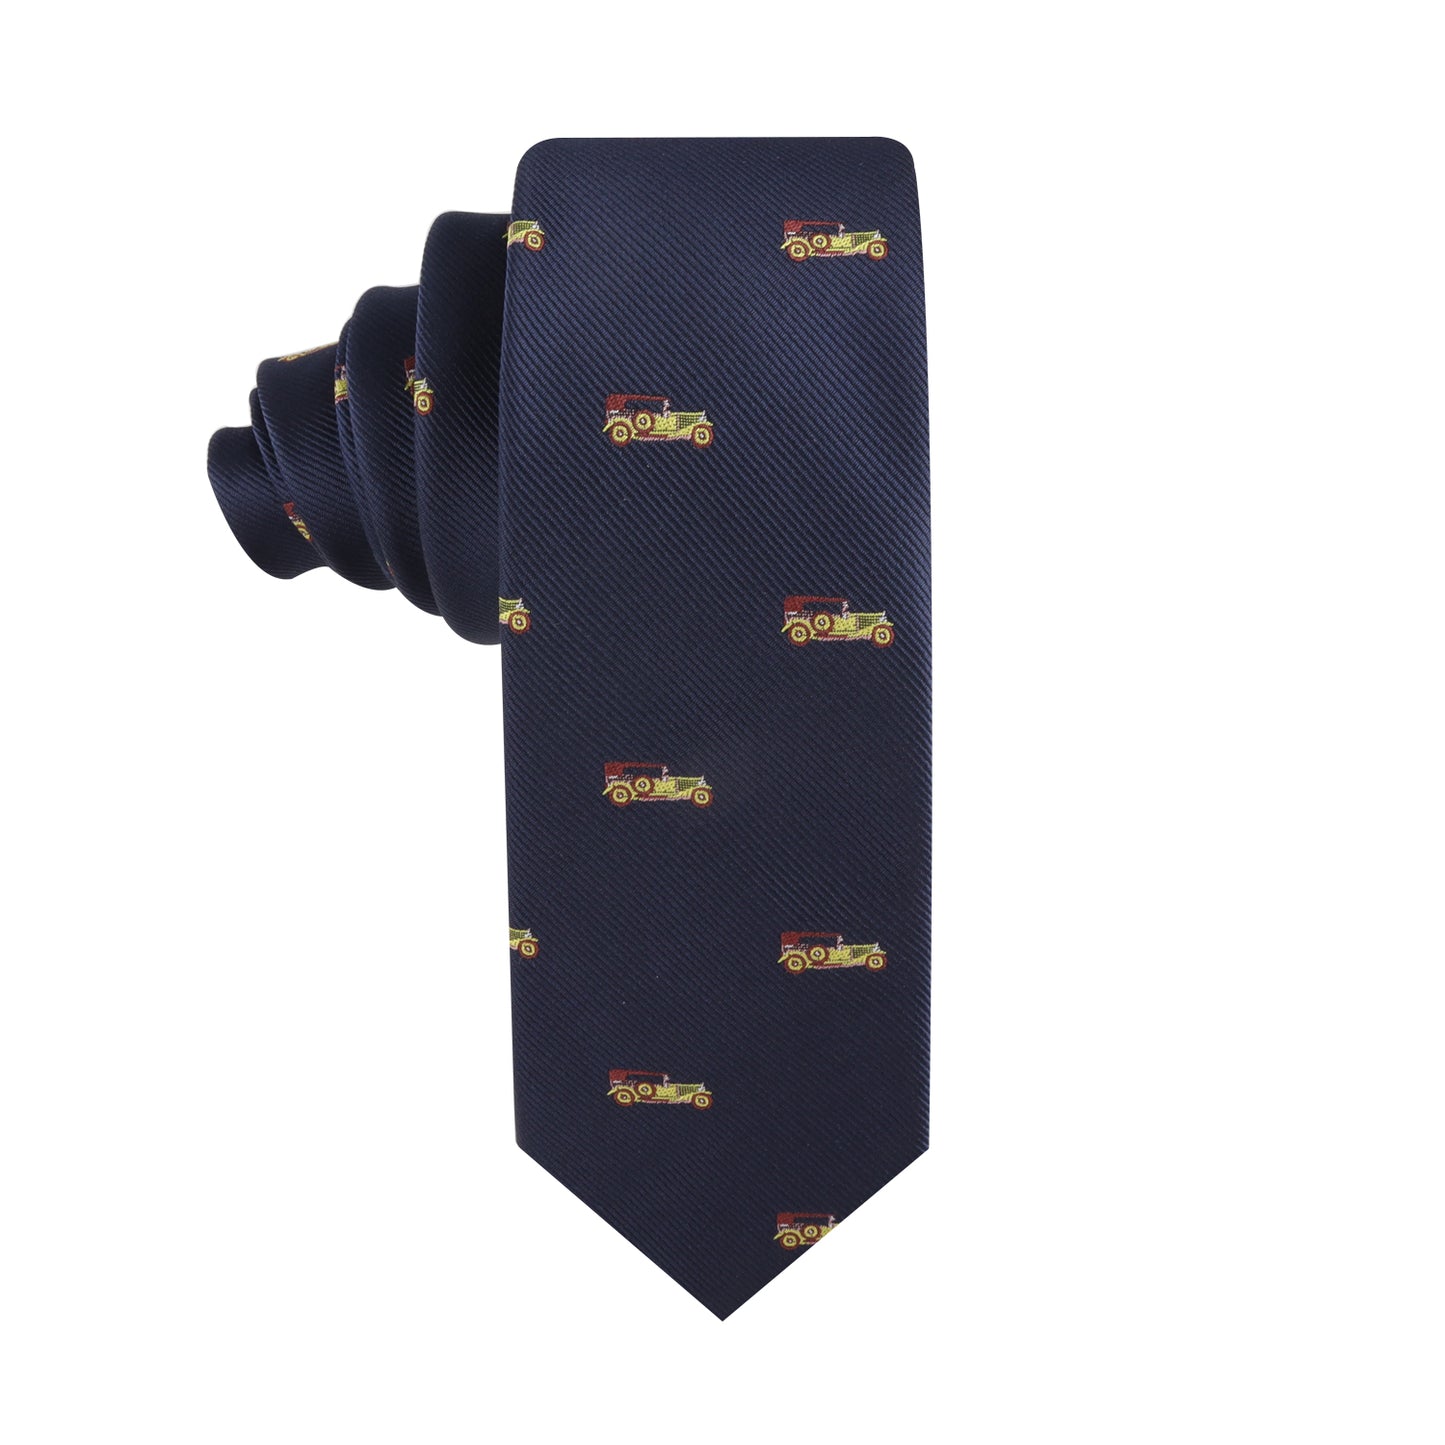 A Classic Car Skinny Tie with a vintage class logo on it.